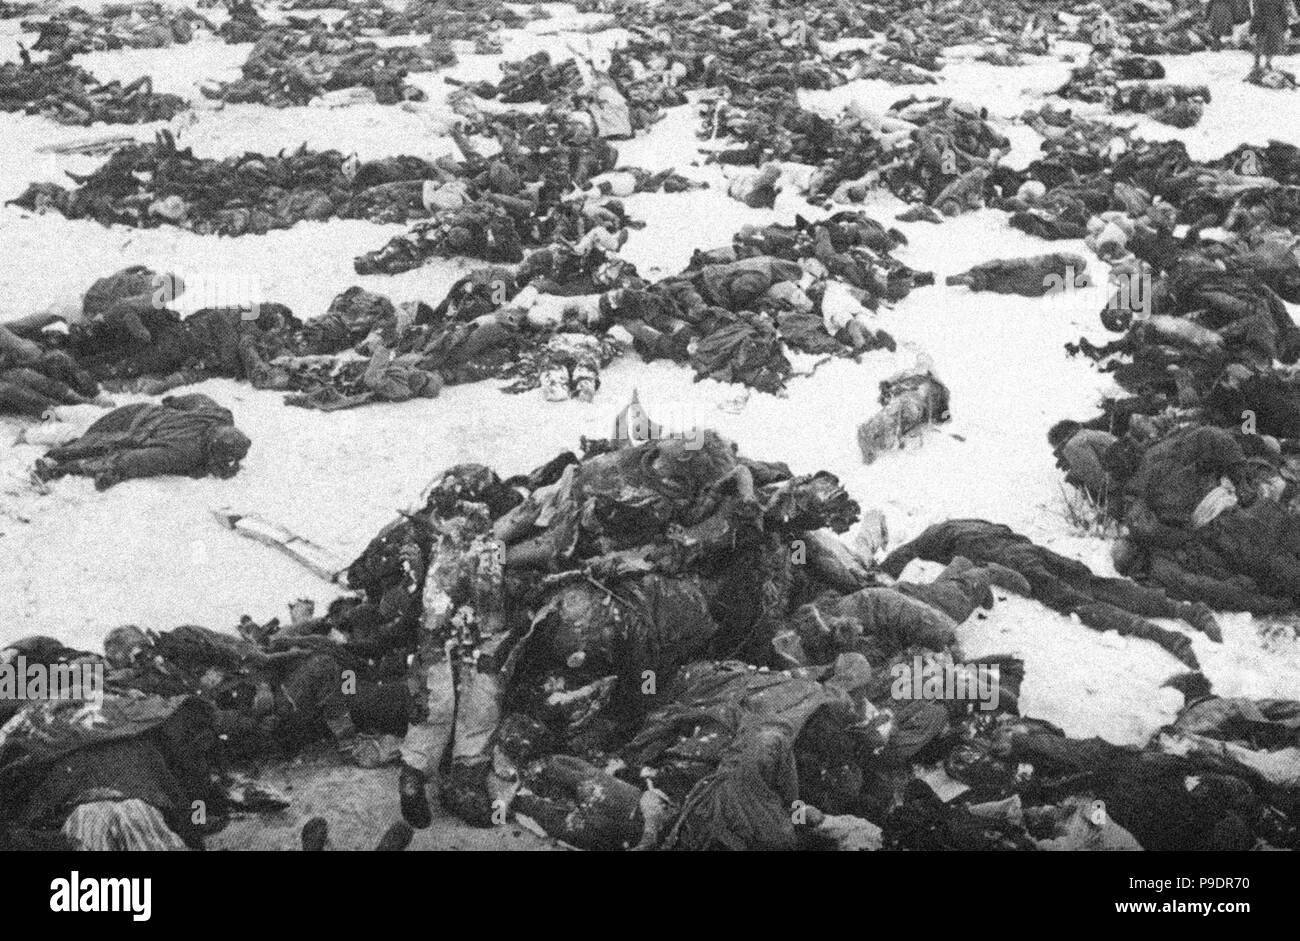 German soldiers killed in the Battle of Stalingrad. Museum: Russian State Film and Photo Archive, Krasnogorsk. Stock Photo